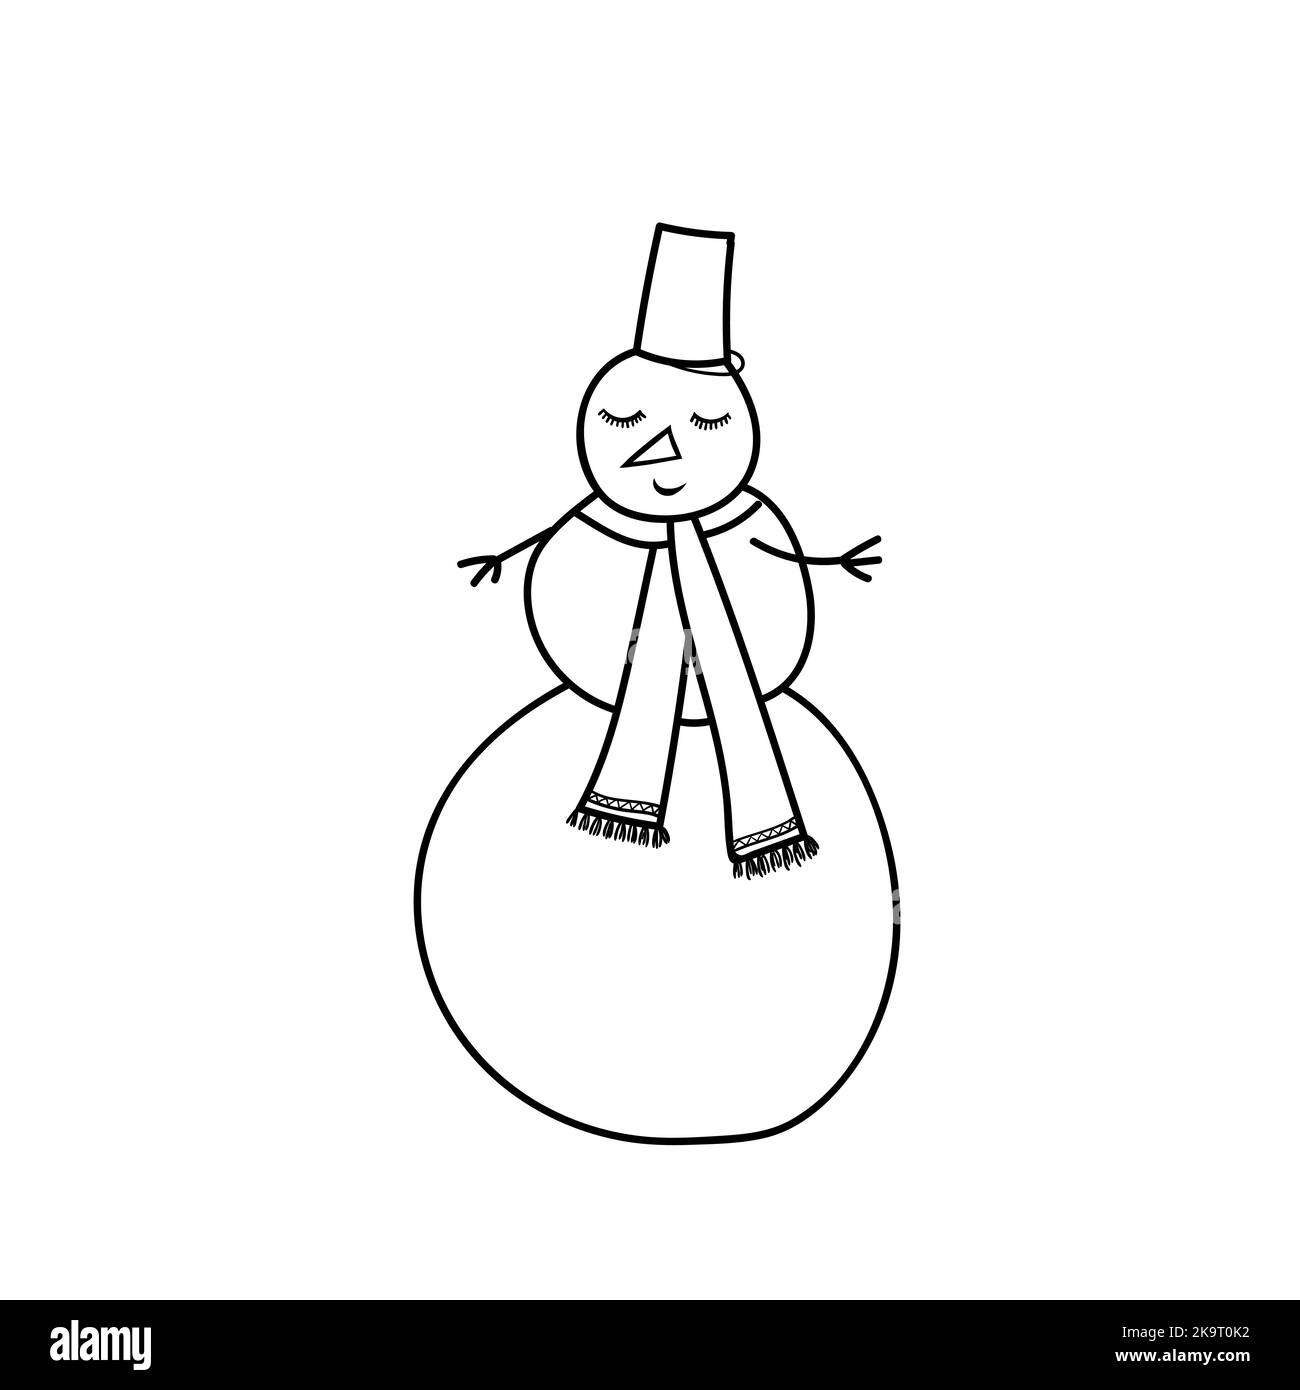 Funny snowman. Outline style illustration for coloring book, stickers, cards. Stock Vector